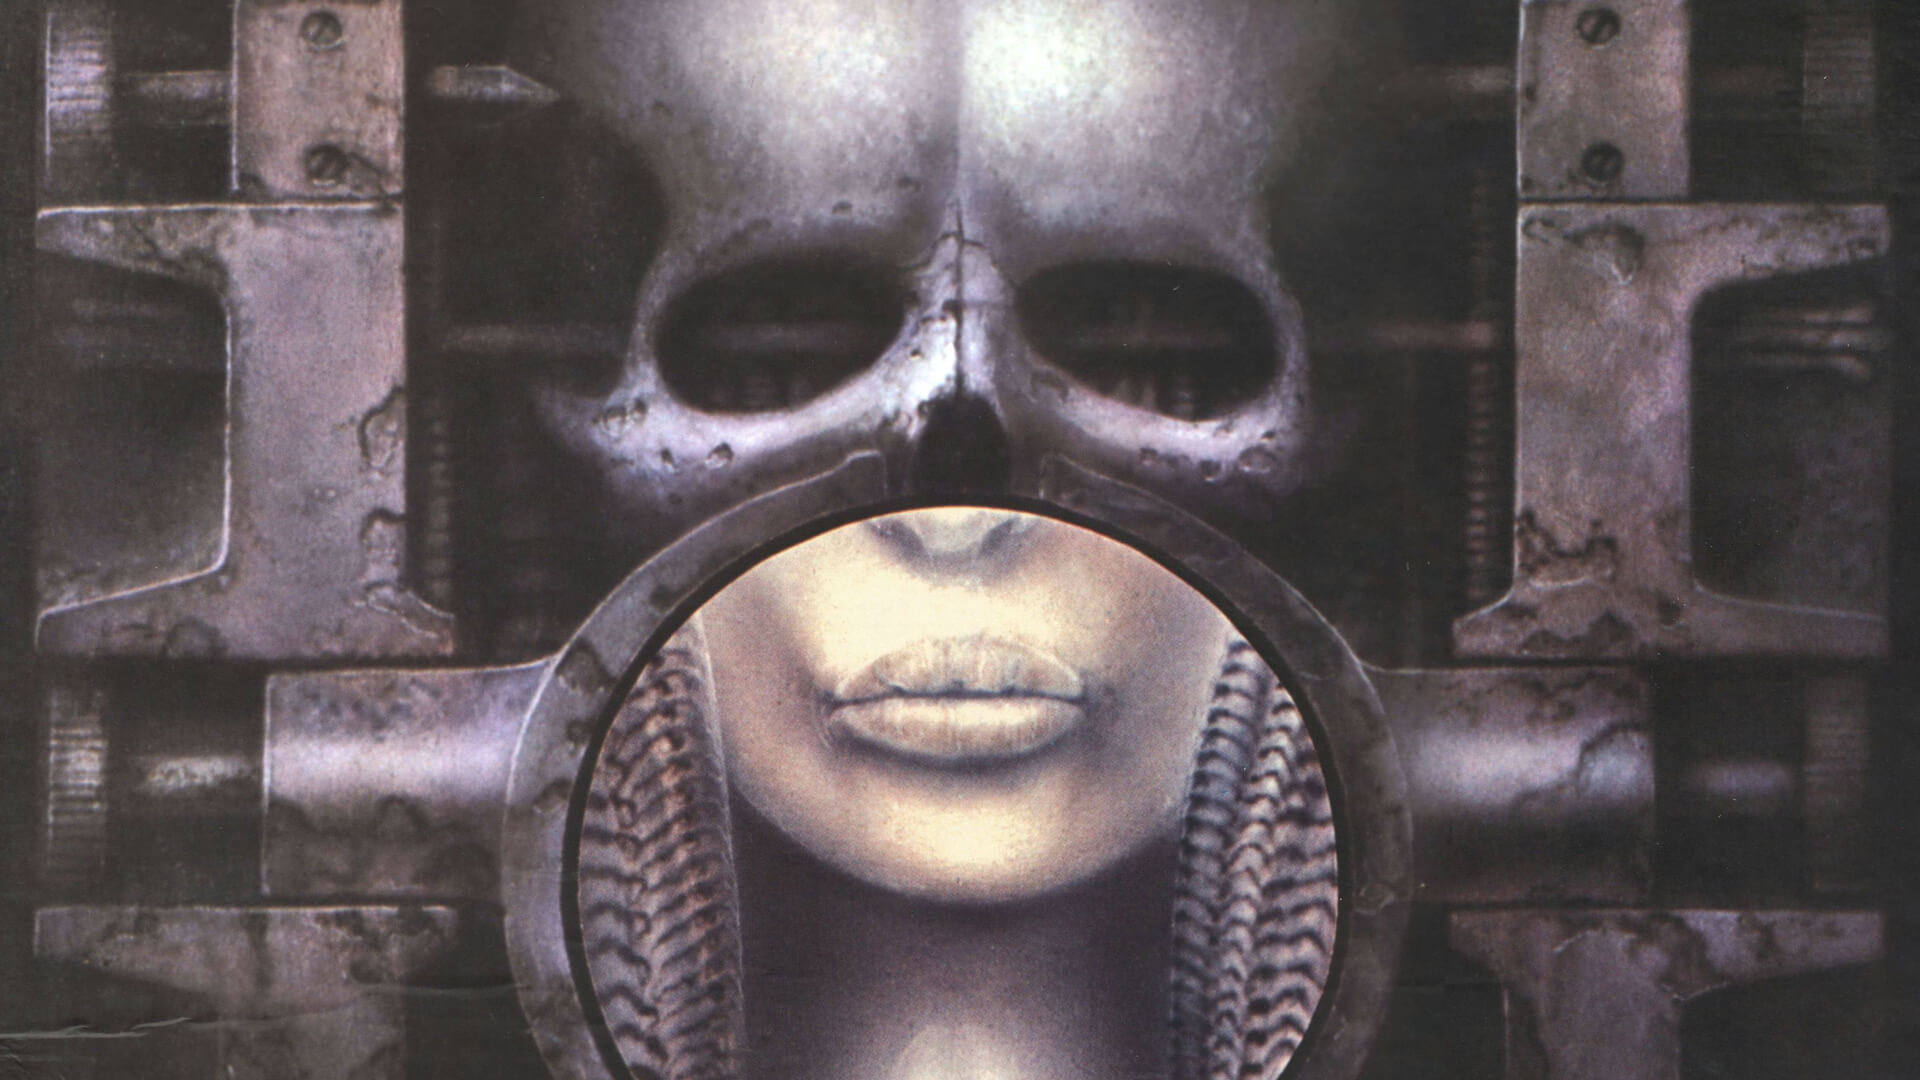 Revisiting 'Brain Salad Surgery' By Emerson, Lake & Palmer. Articles Ultimate Guitar.Com